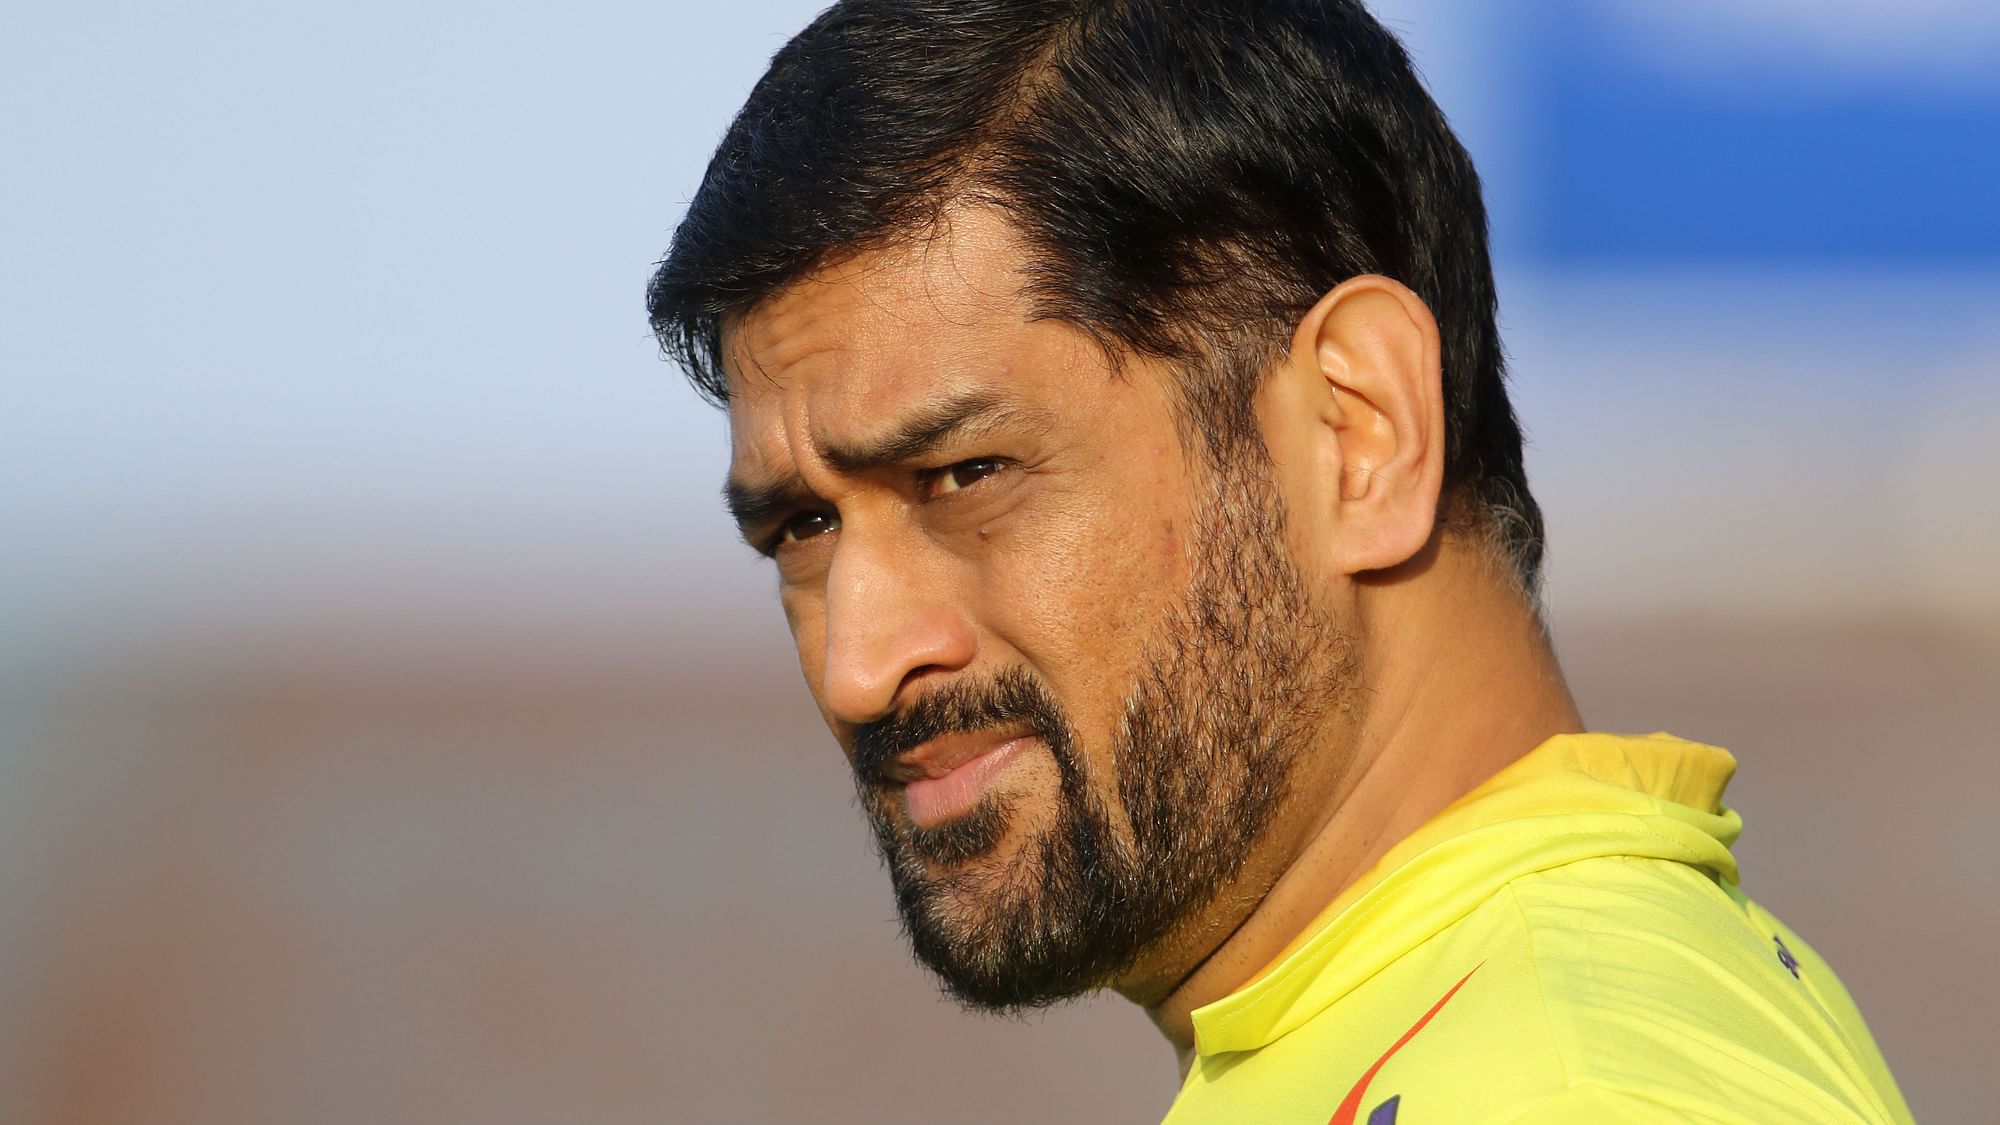 IPL 2020: Dinesh Karthik has won the toss and elected to bat first against MS Dhoni’s Chennai Super Kings.